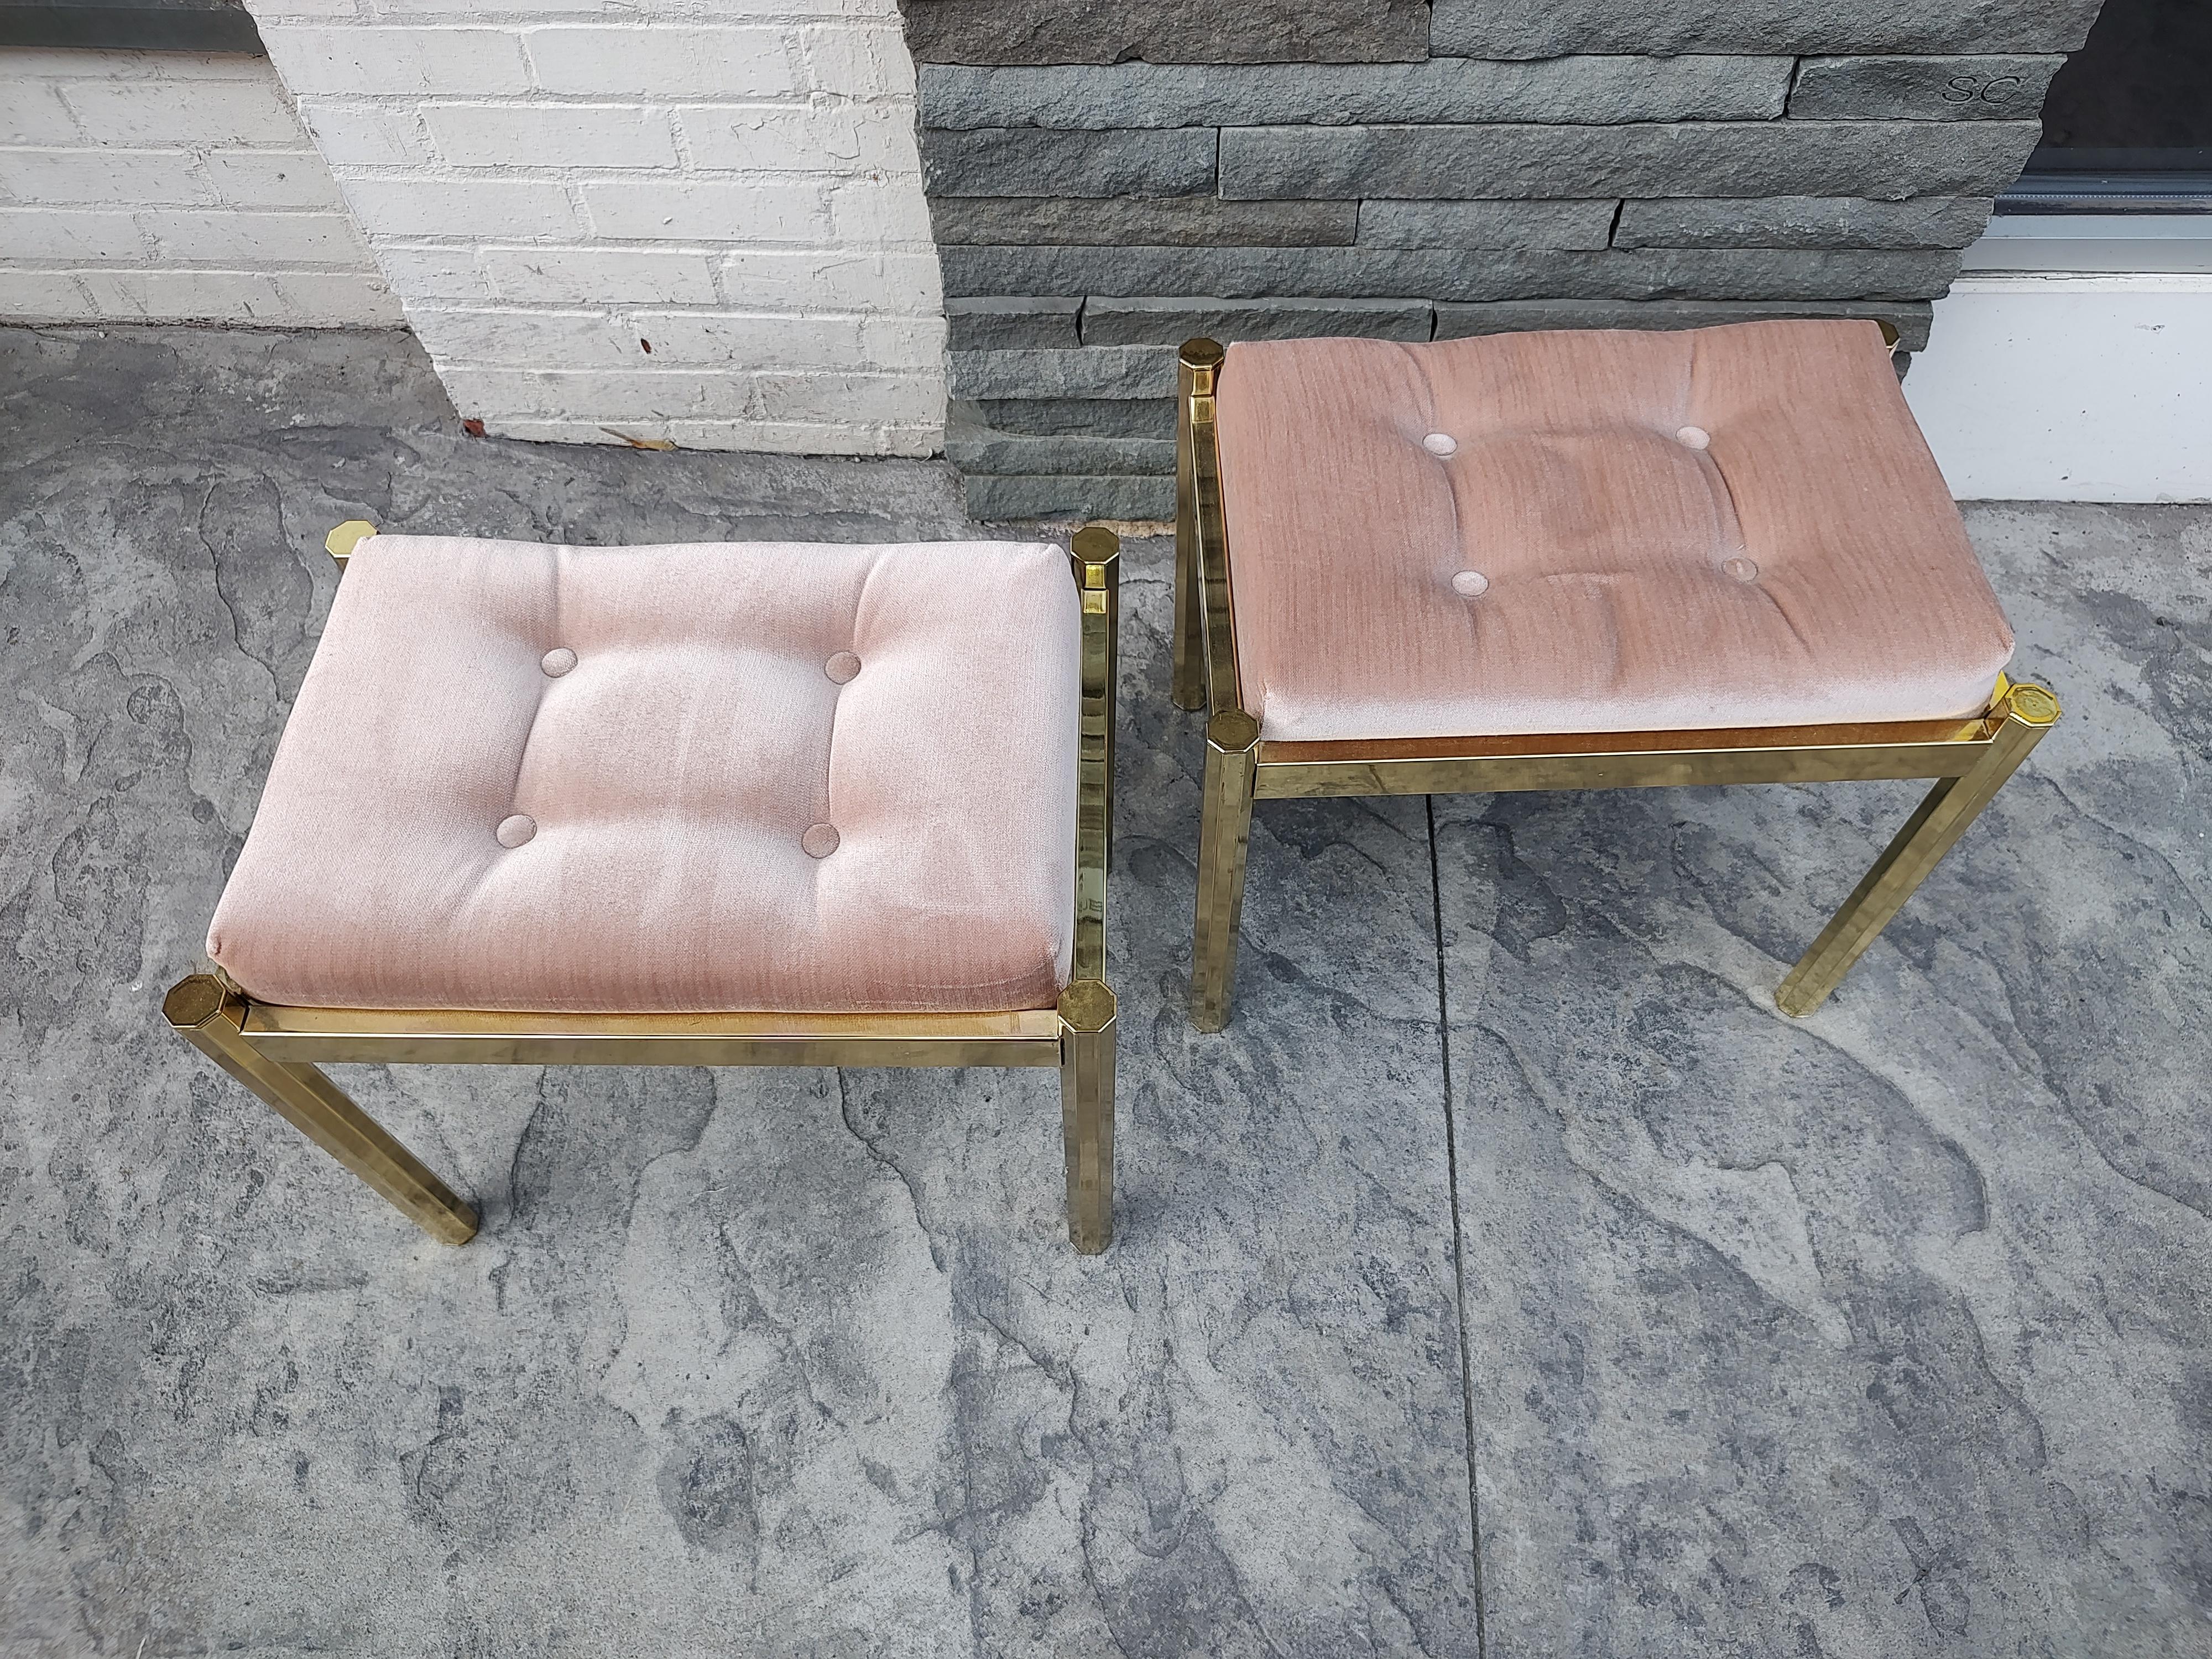 Pair of Mid-Century Modern Hollywood Regency Brass with Tufted Cushions Benches 1